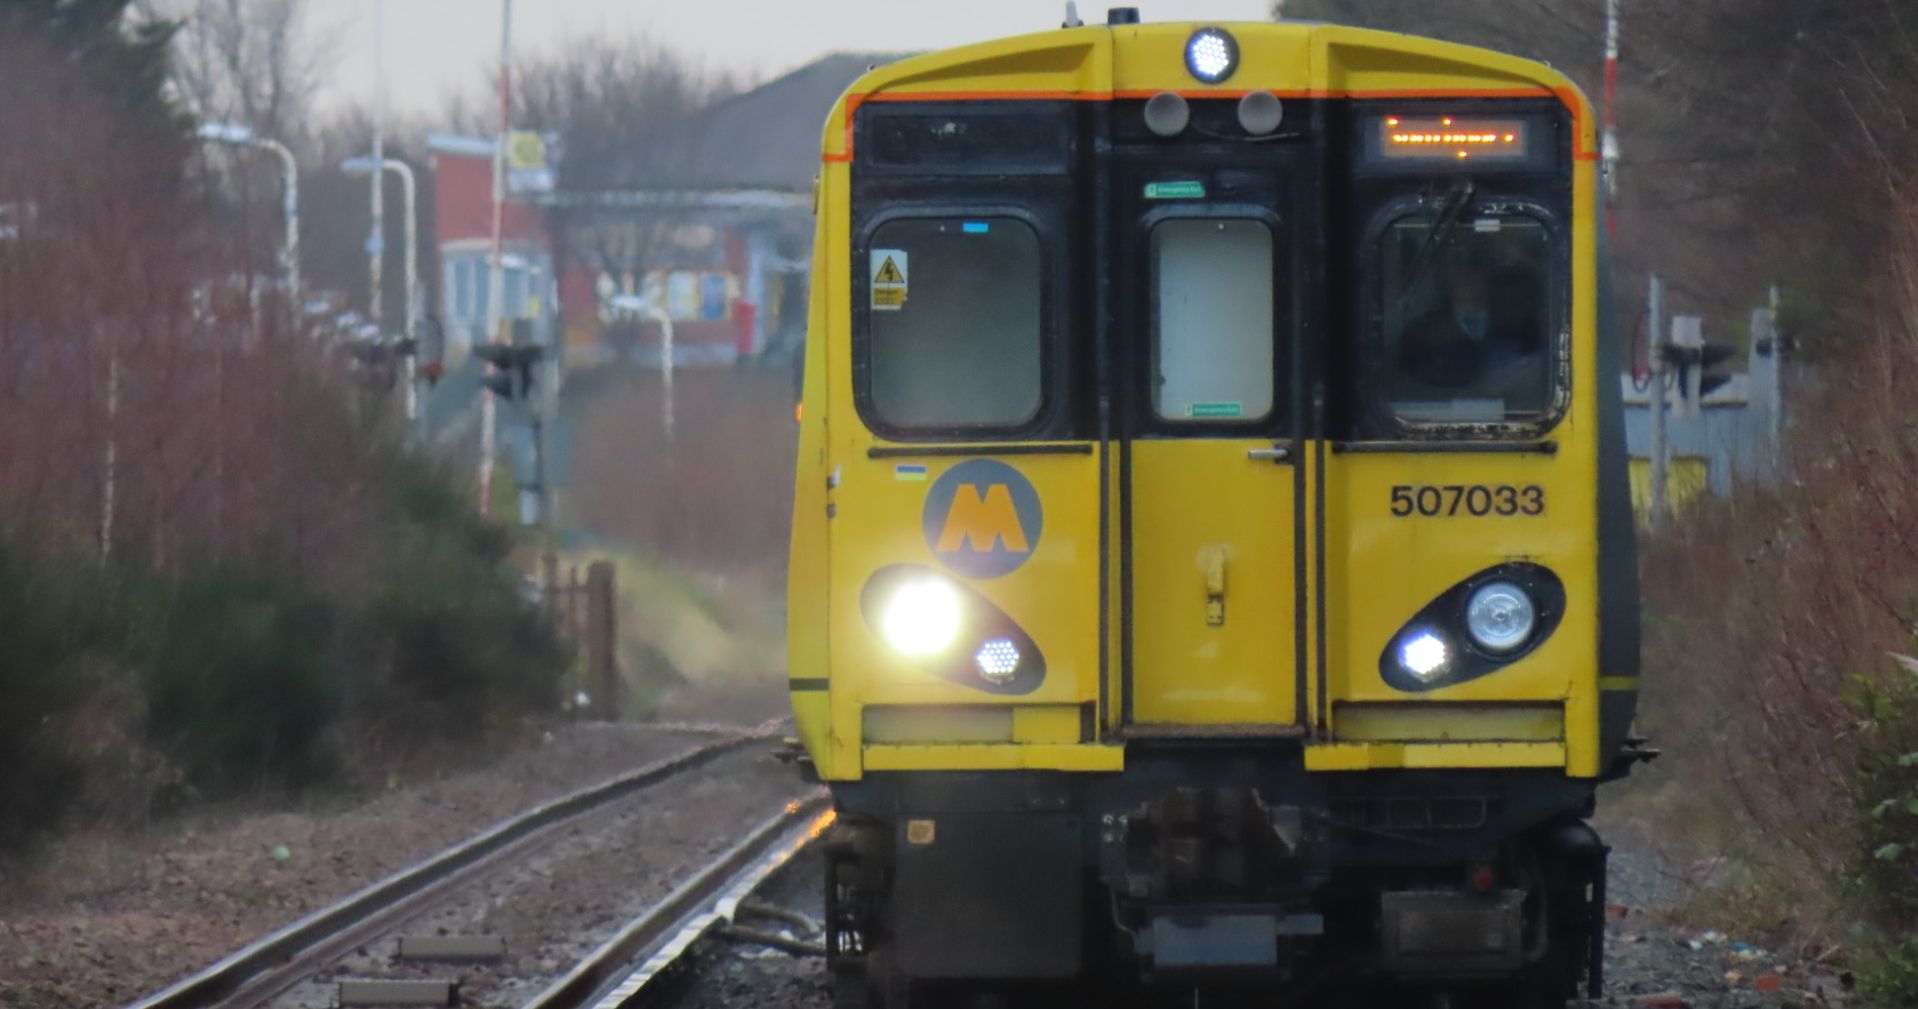 A Merseyrail train in Birkdale in Southport. Photo by Andrew Brown Media